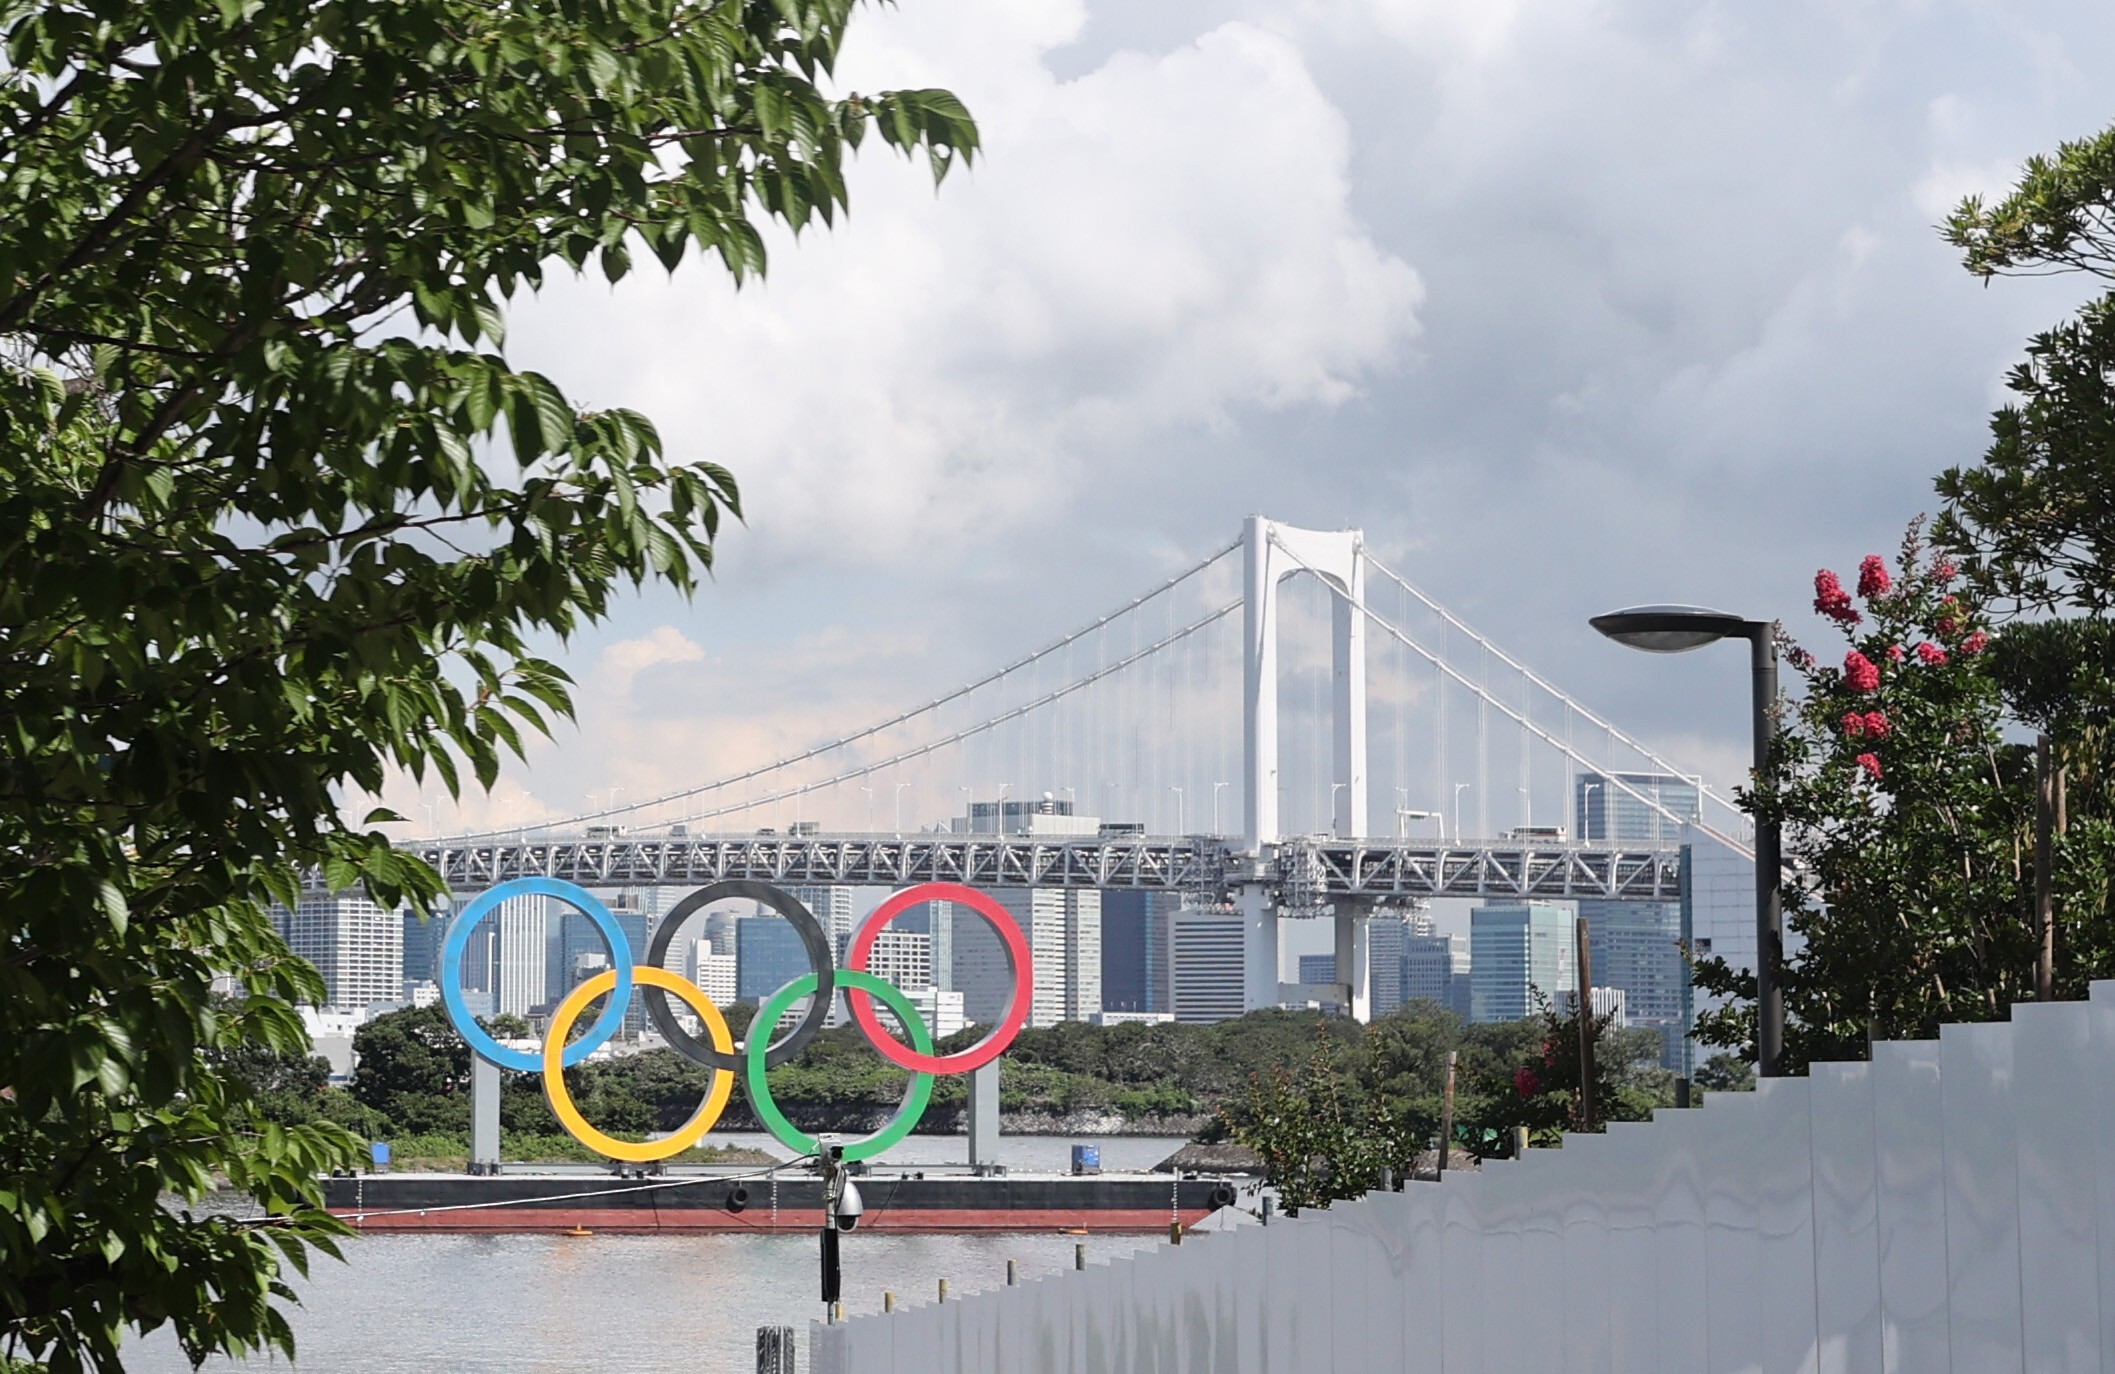 A new online survey found that most people around the world think the Olympics shouldn’t go ahead as planned - especially in Japan. Photo: YNA/DPA